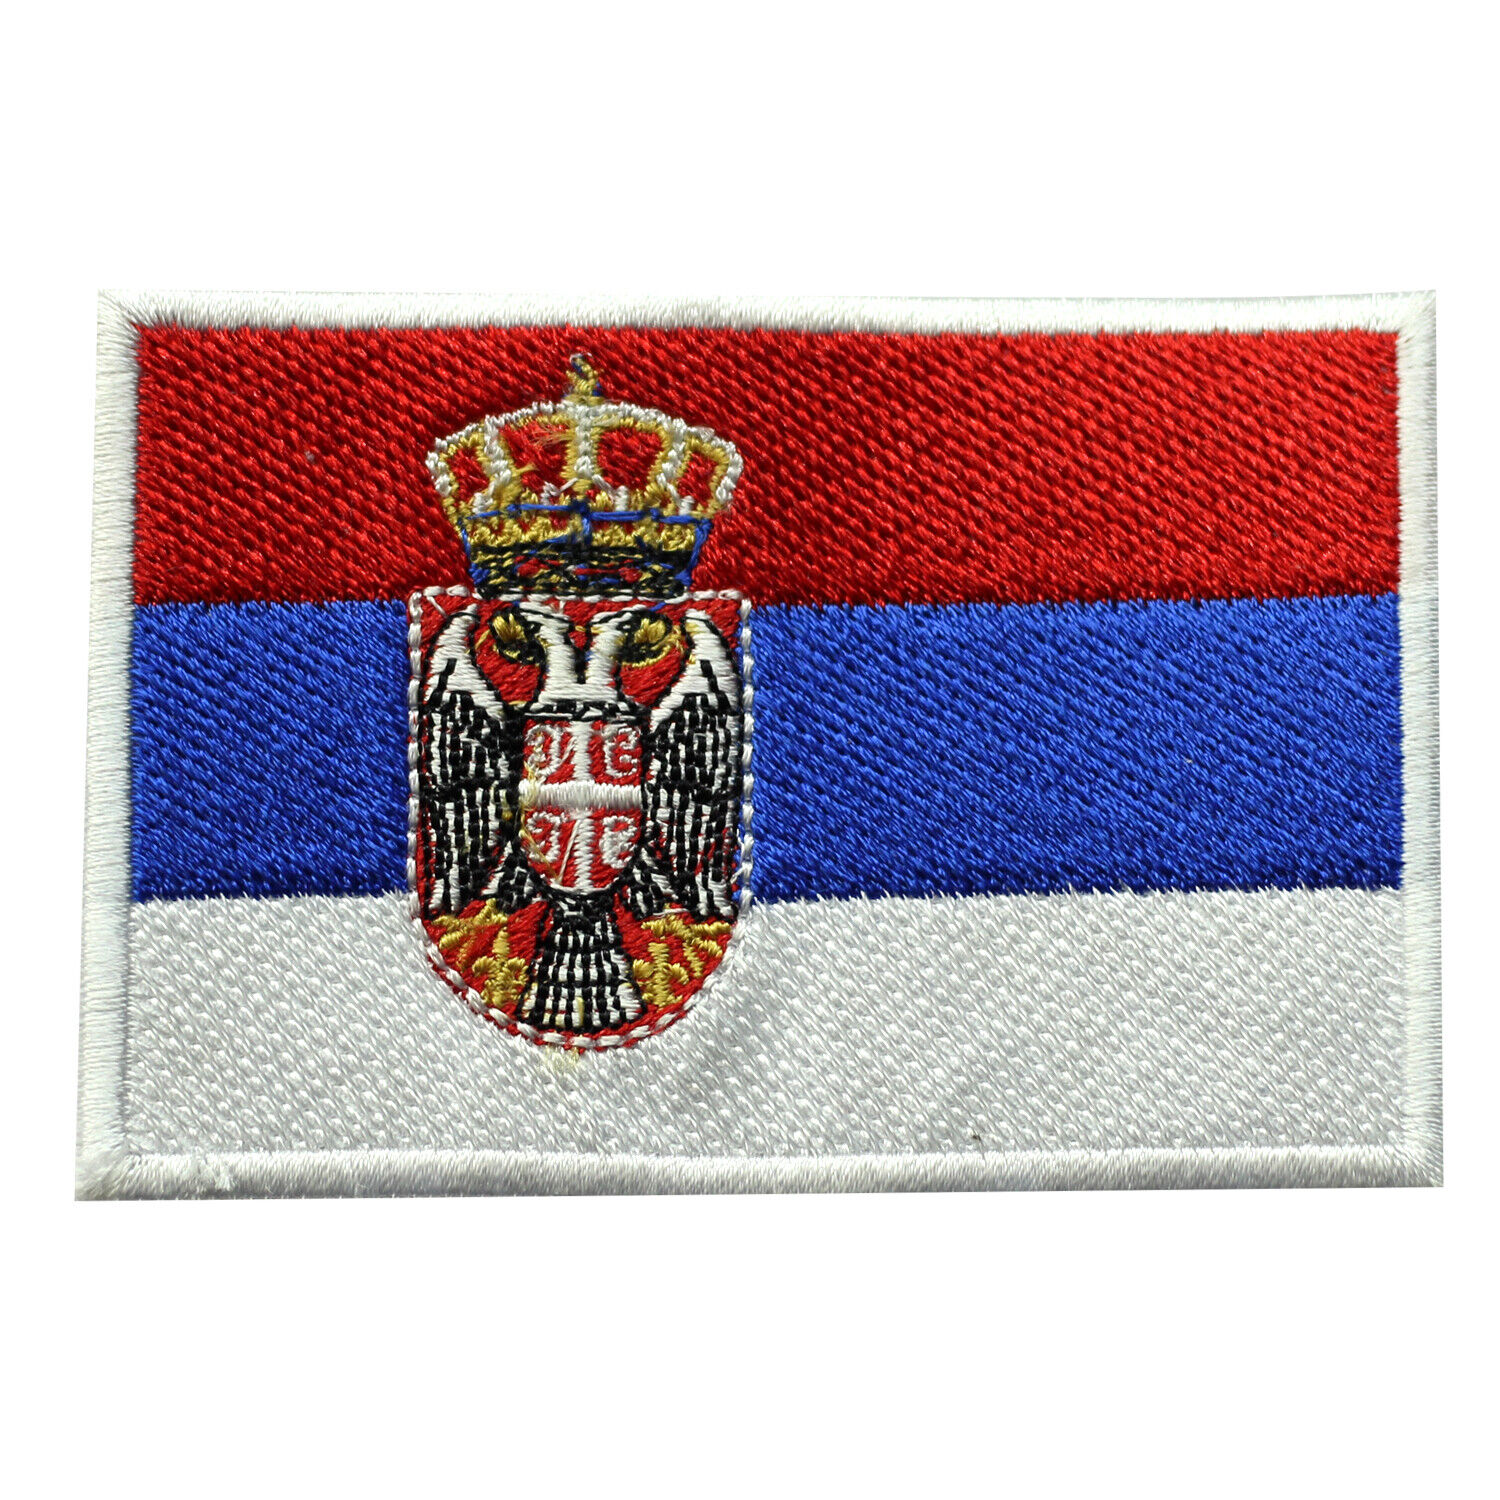 Serbia National Country Flag Patch Iron On Patch Sew On Badge Embroidered Patch